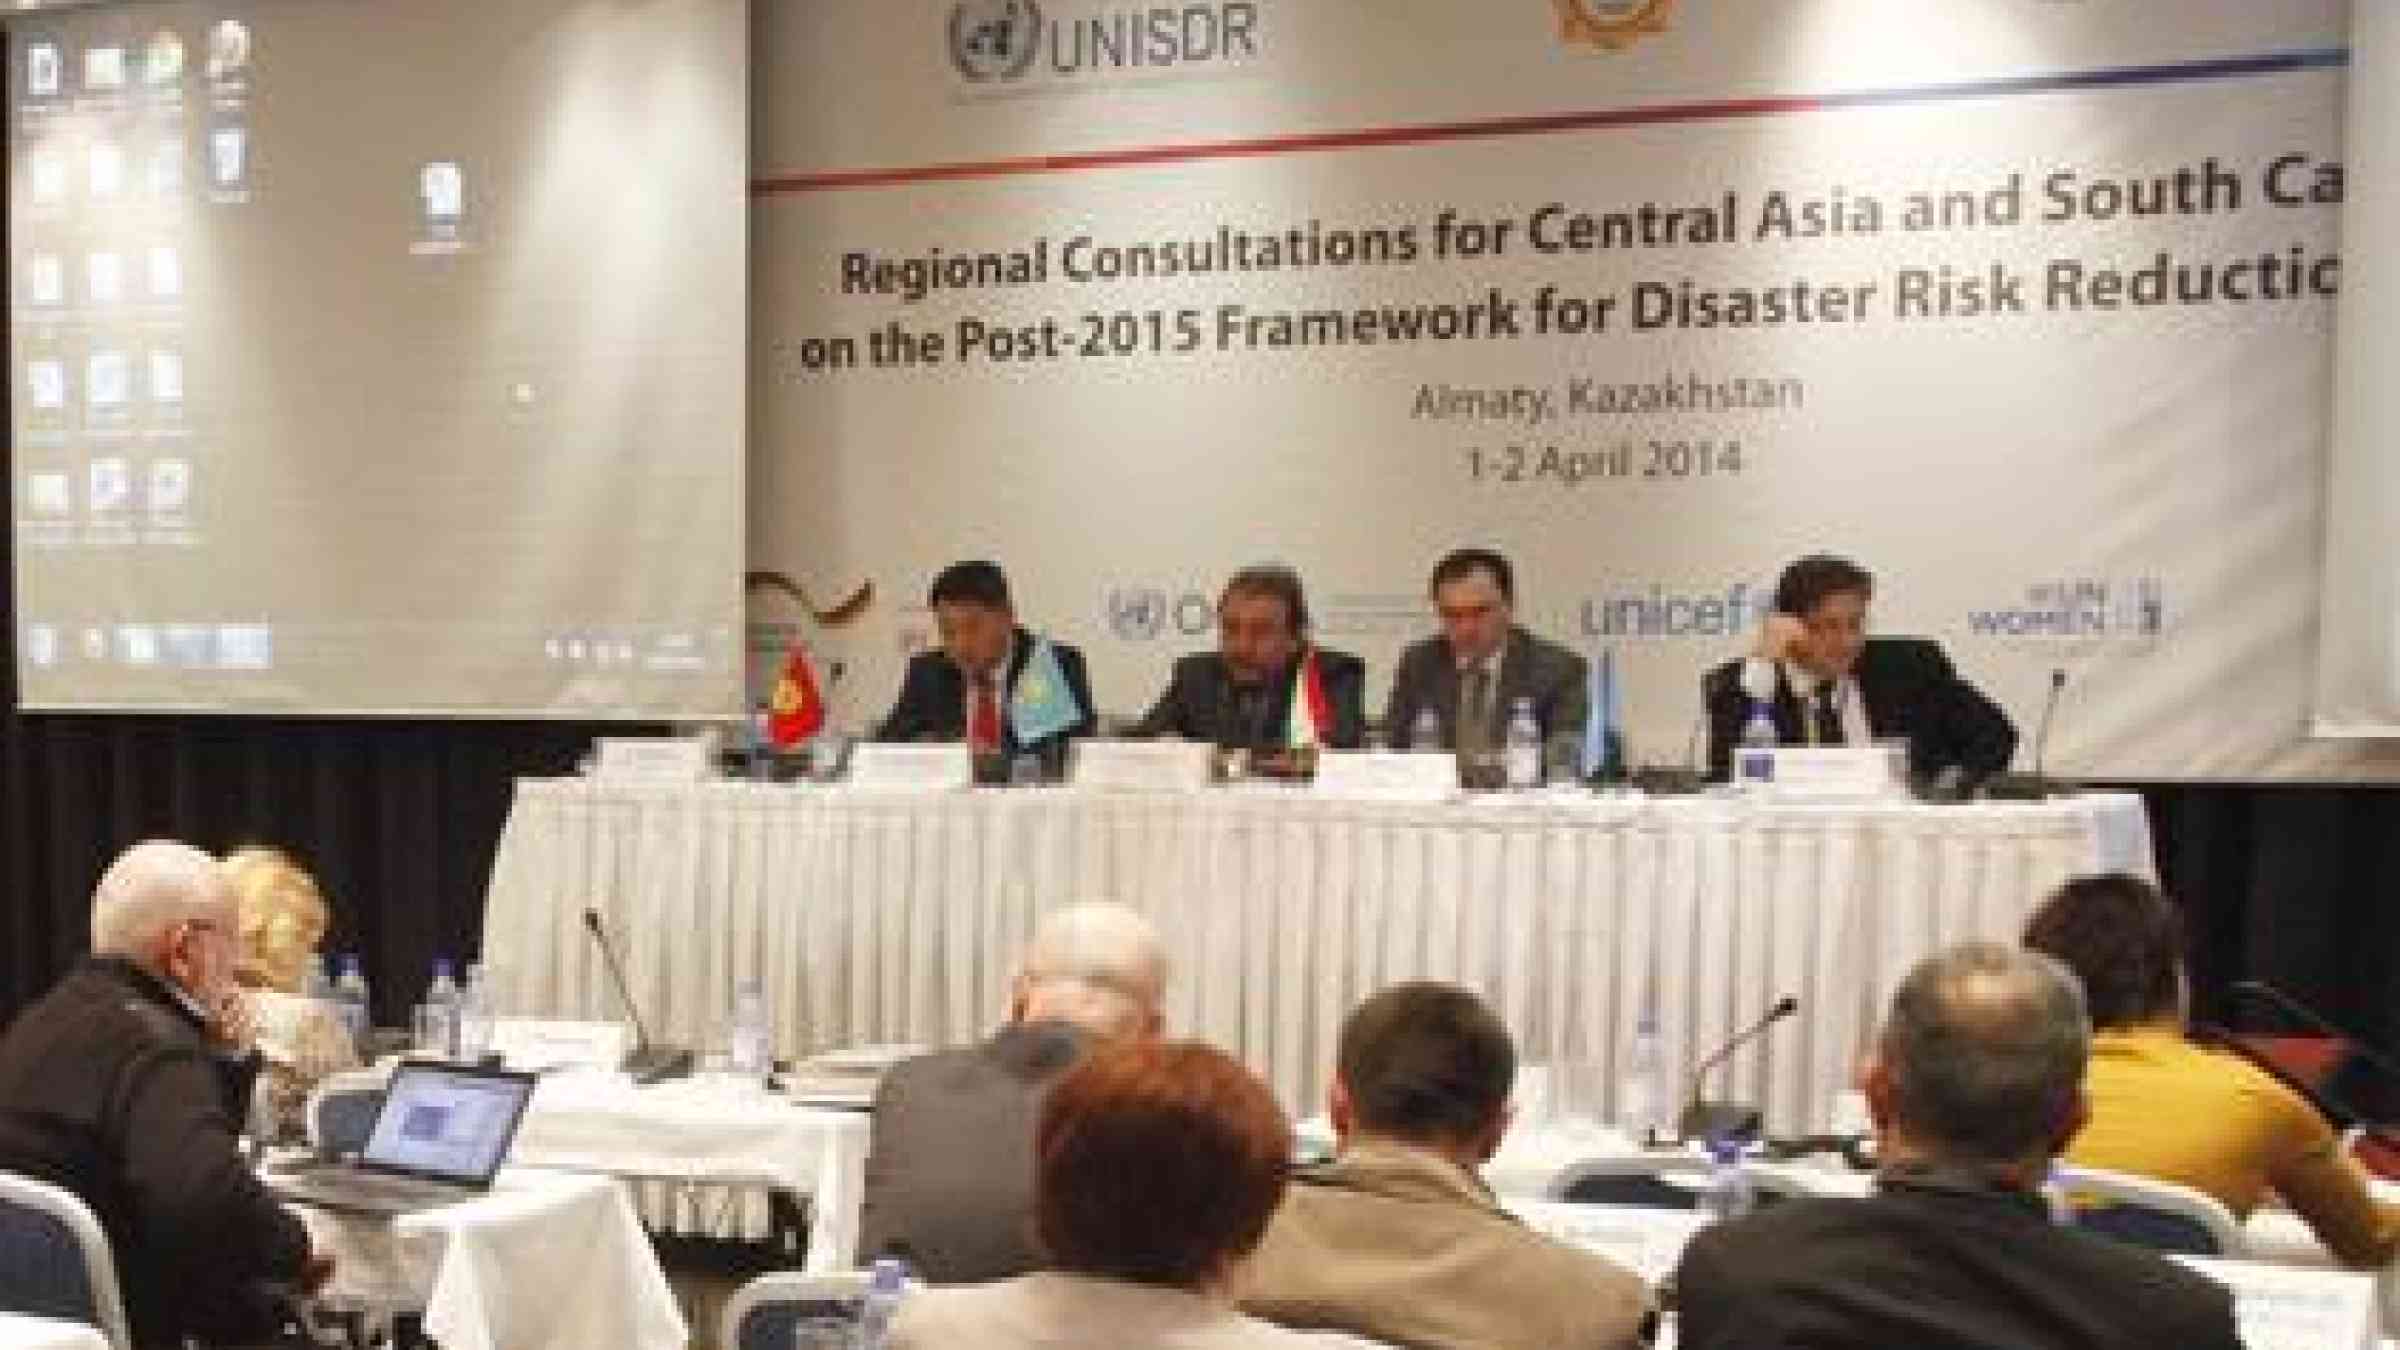 Top disaster management officials from eight countries in Central Asia and the Southern Caucasus came together in Almaty, Kazakhstan to discuss the Post-2015 Framework for Disaster Risk Reduction.